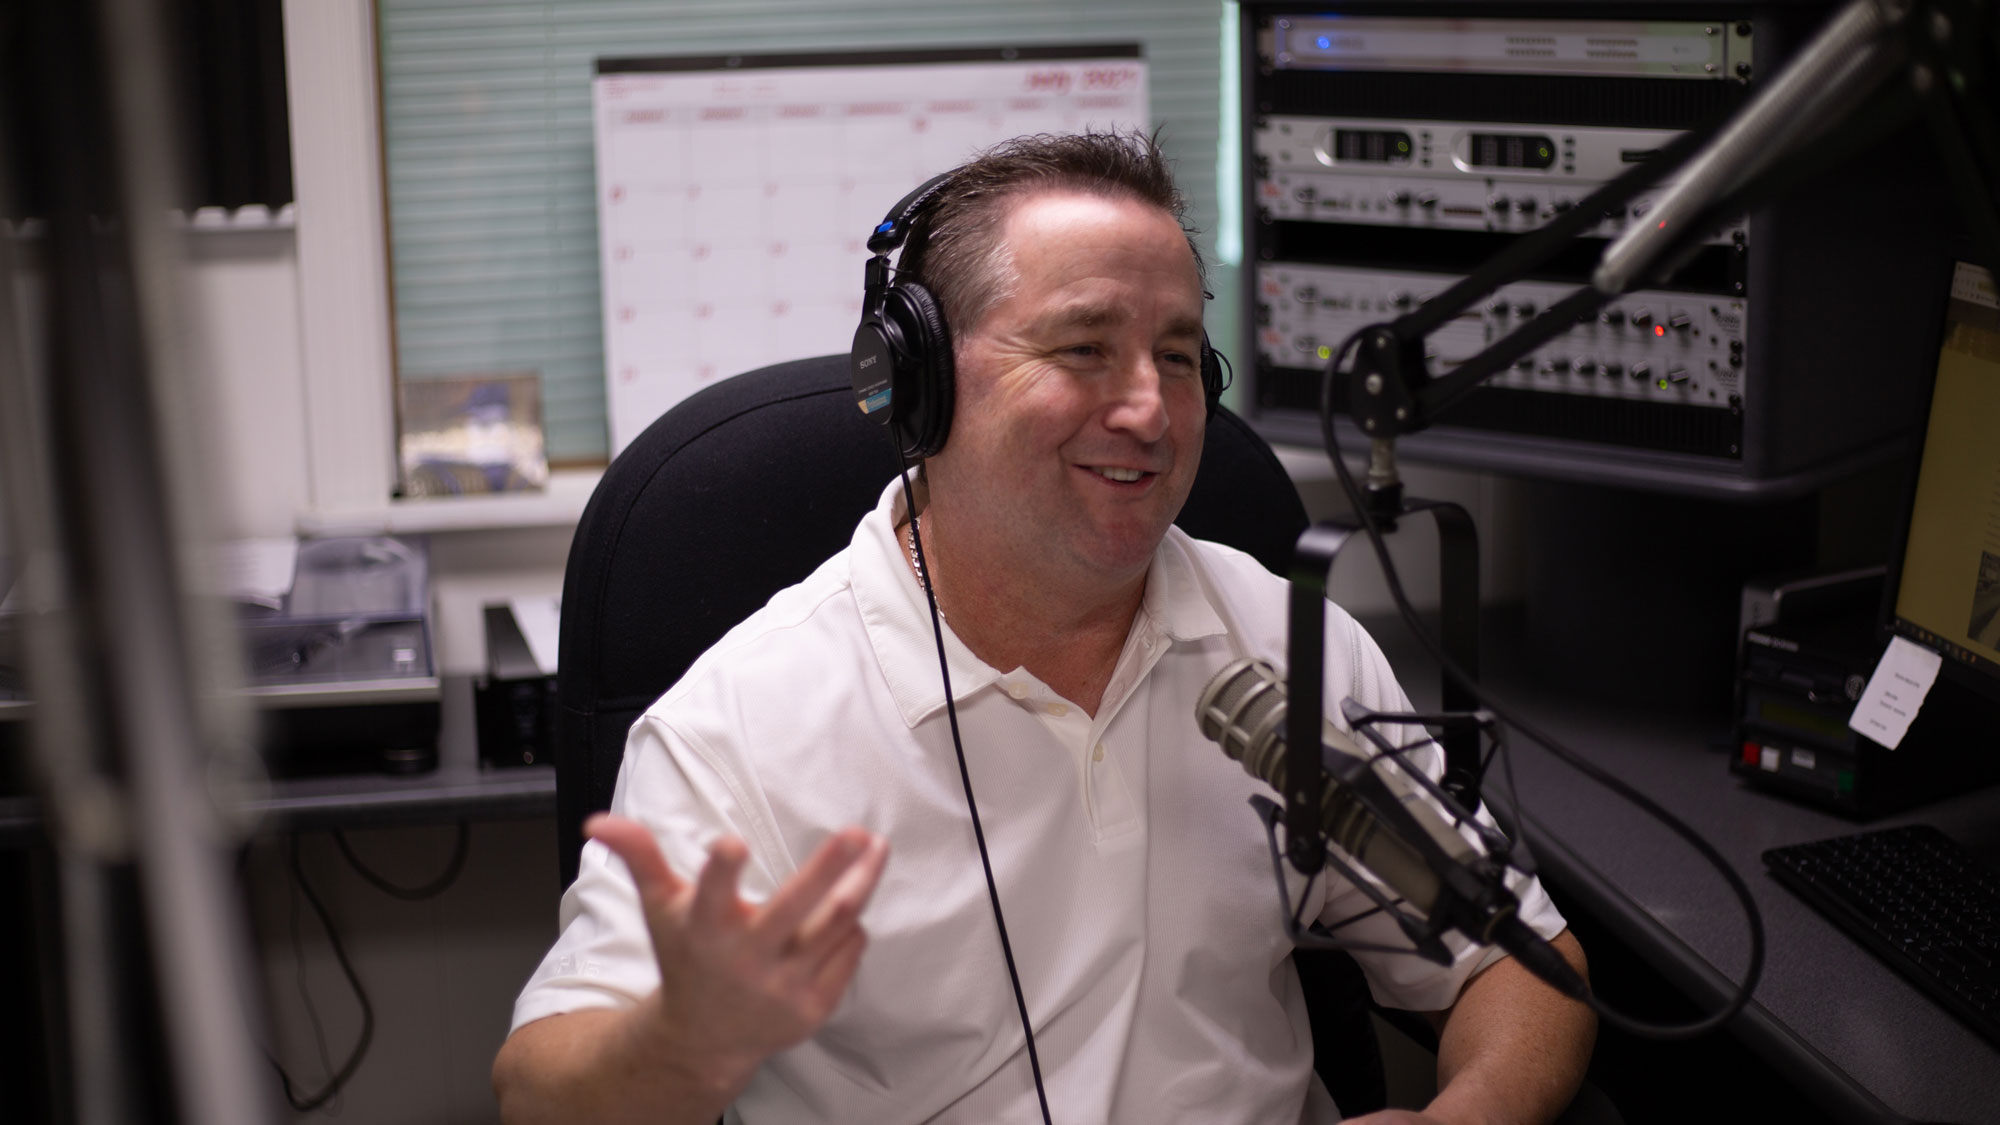 A man in a white polo shirt wears headphones and speaks into a microphone